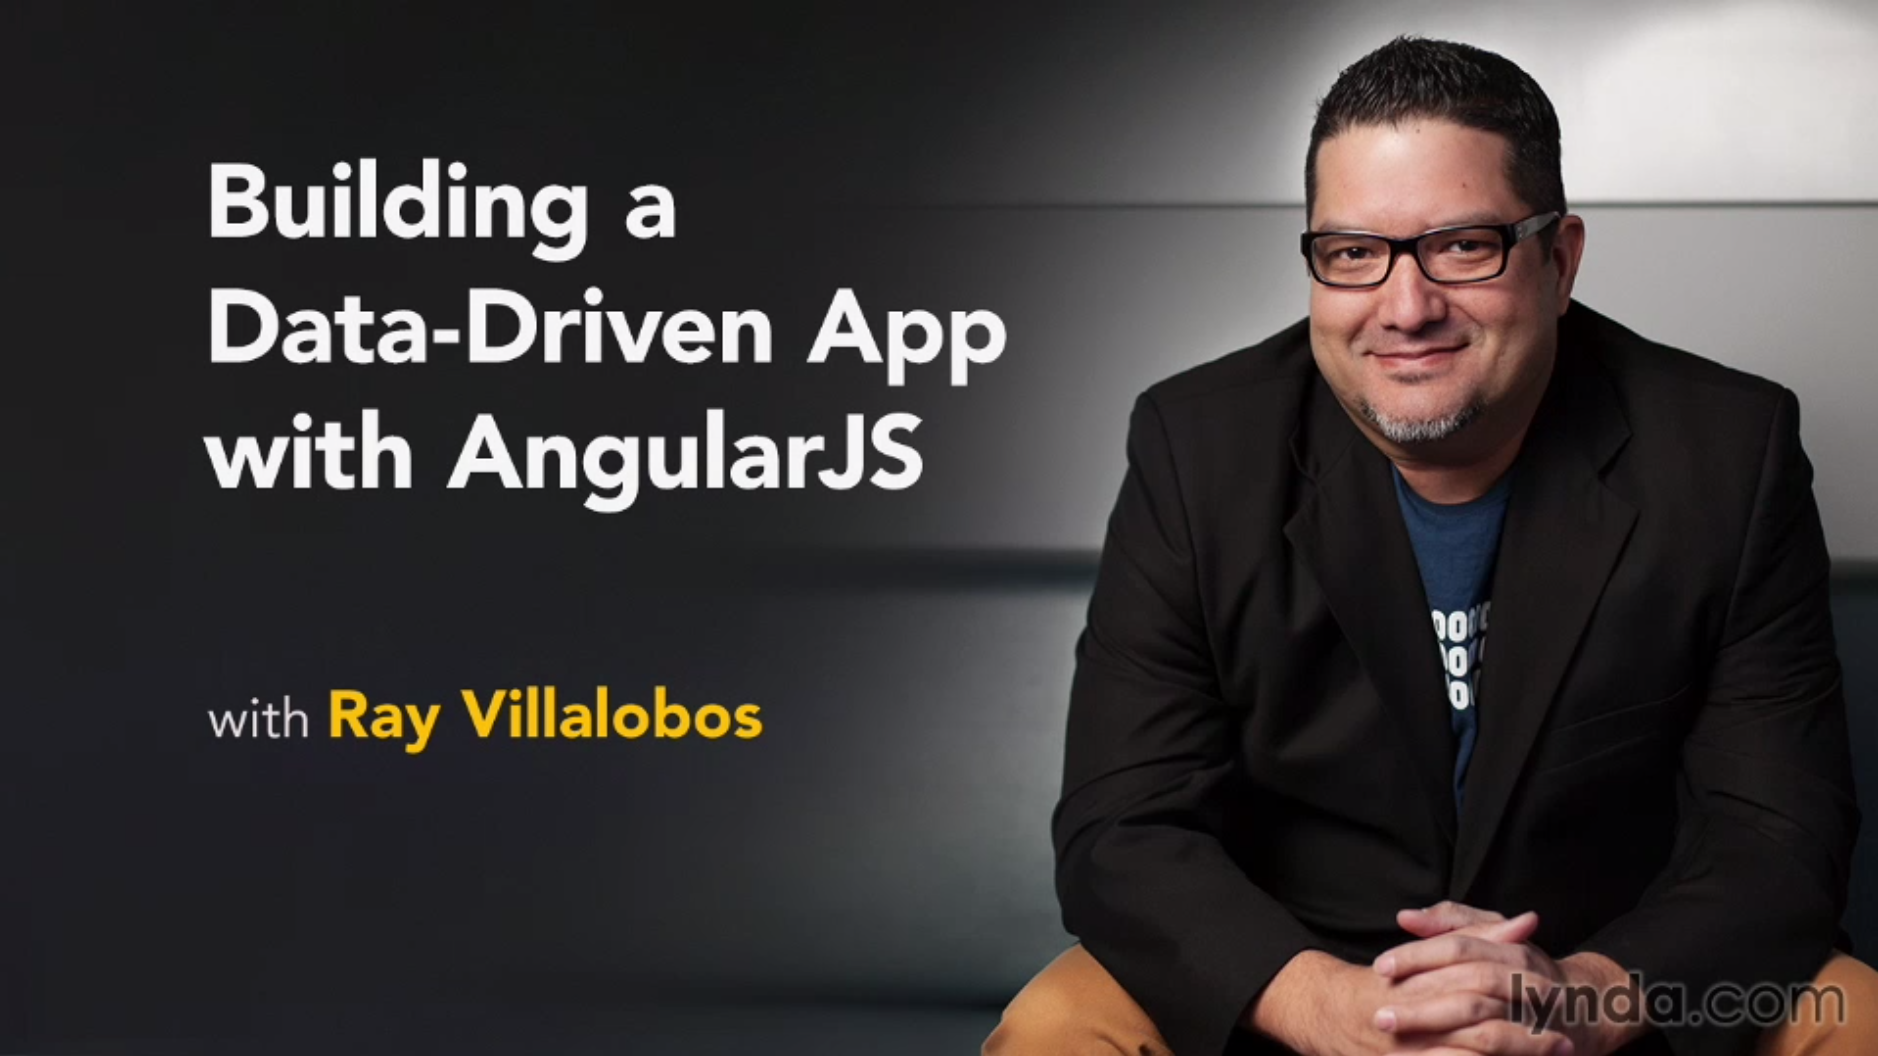 Building a Data-Driven App with AngularJS